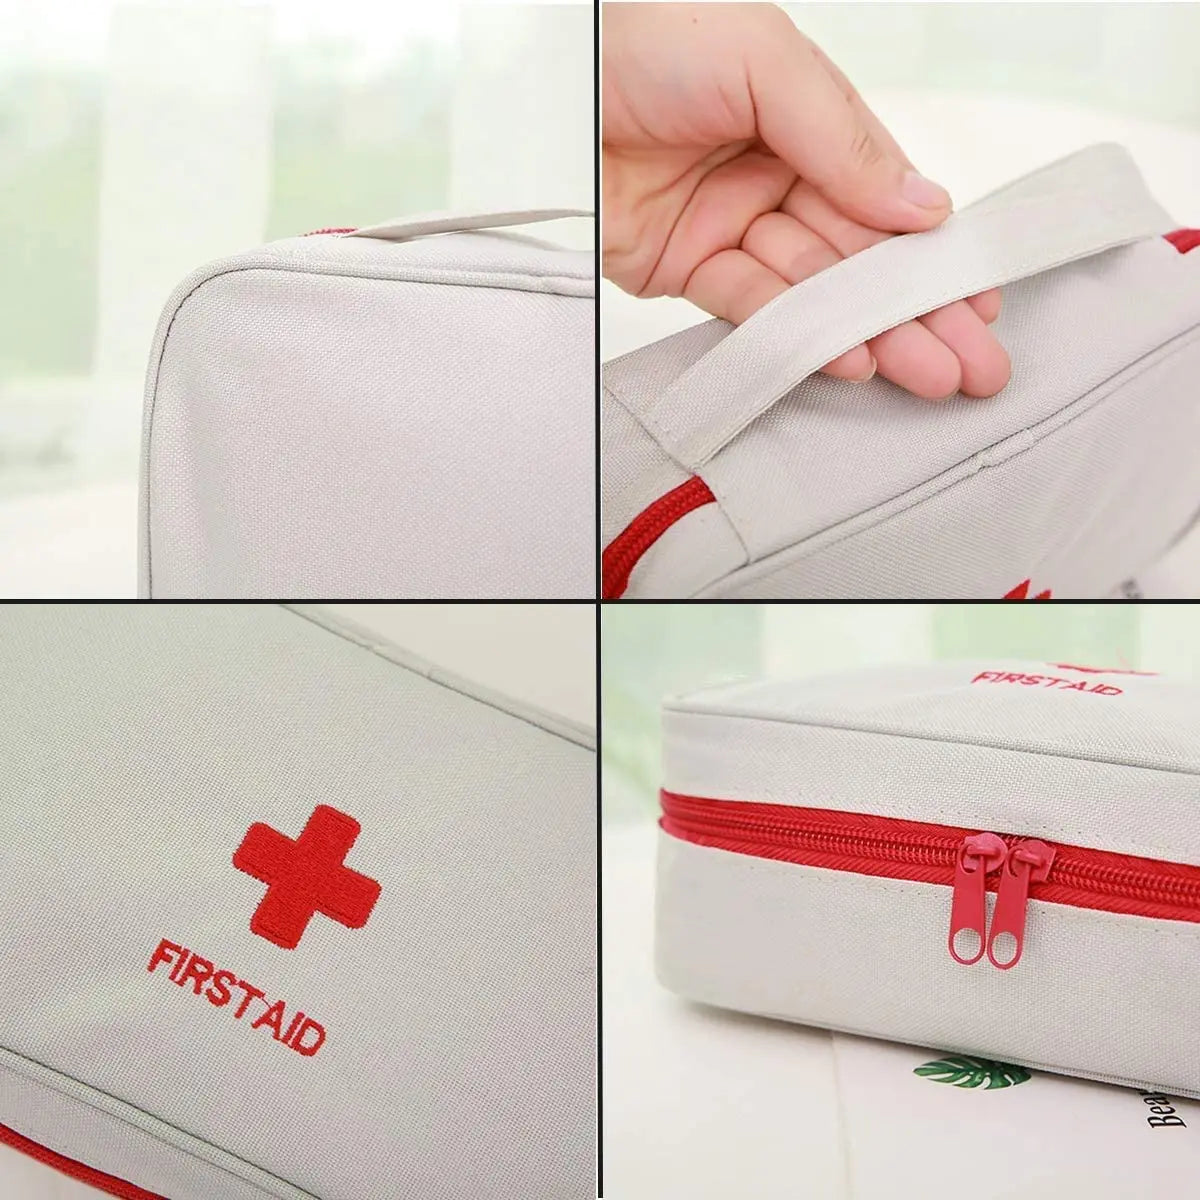 Portable Storage Bag First Aid Emergency Medicine Bag for Outdoor Survival Organizer Emergency Kits Package Travel